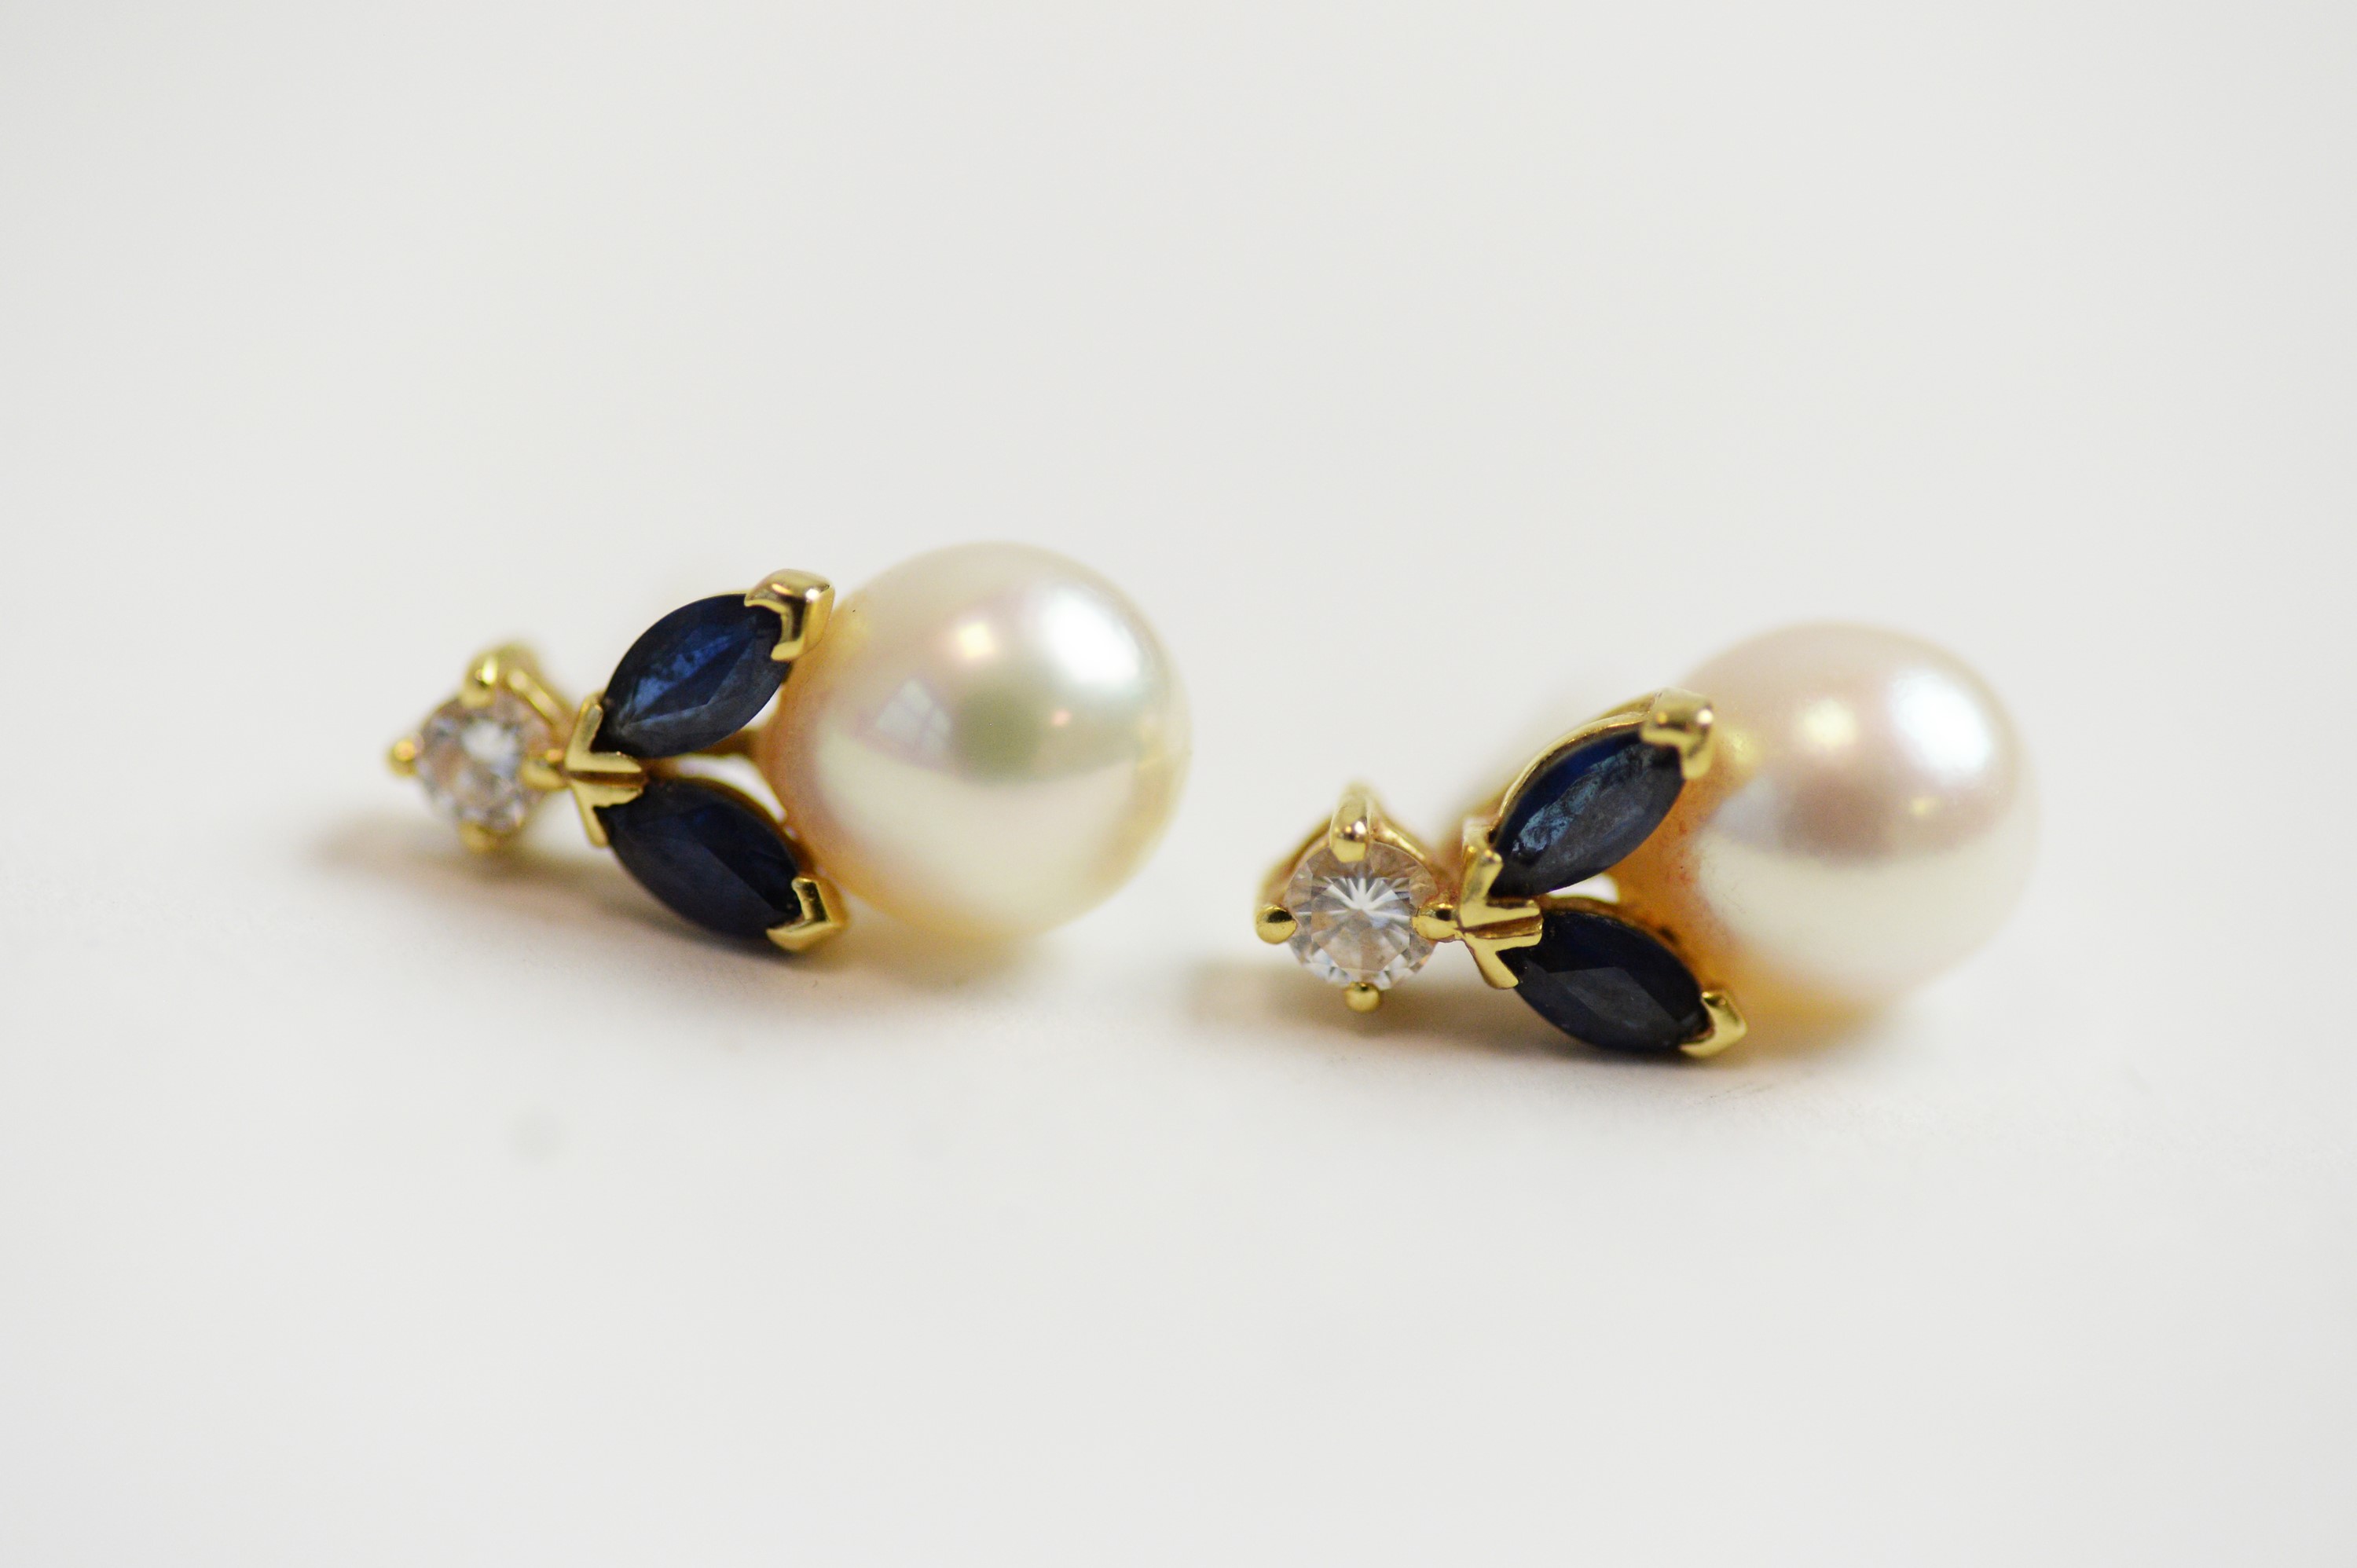 Pearl, diamond and sapphire necklace, bracelet and earrings - Image 5 of 6